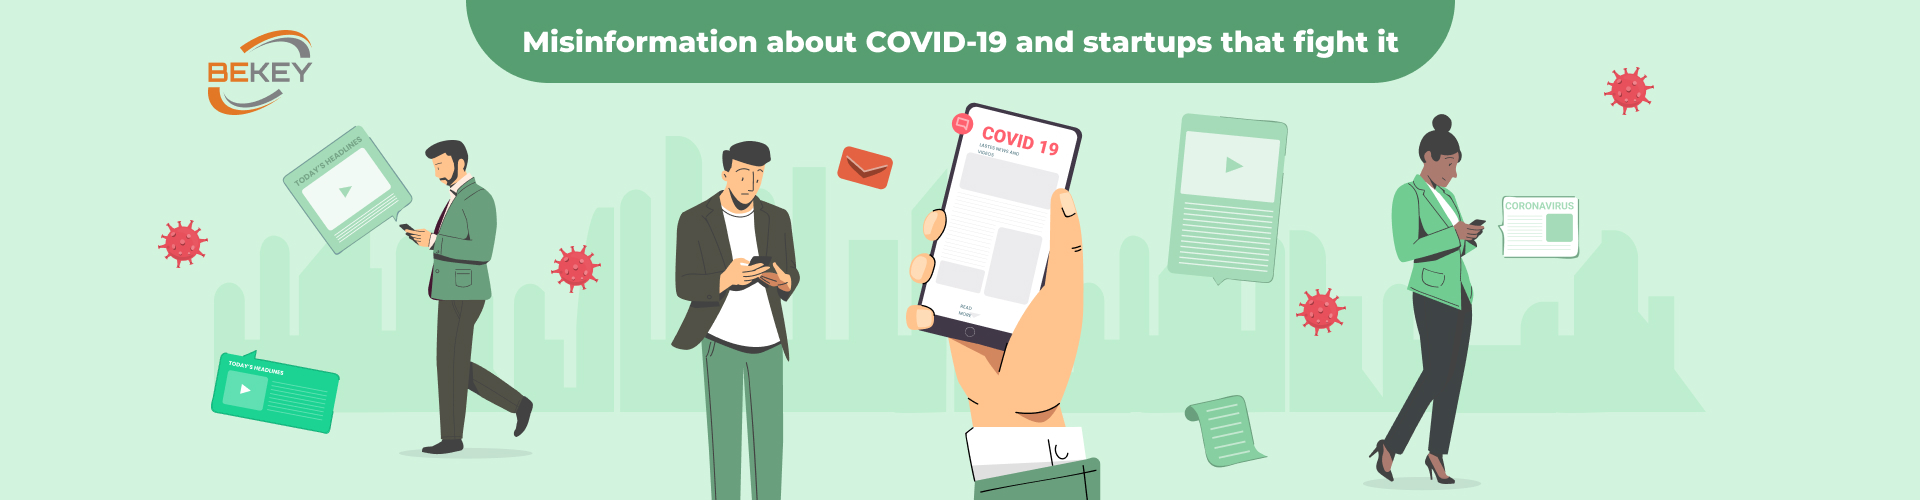 Misinformation about COVID-19 and startups that fight it 